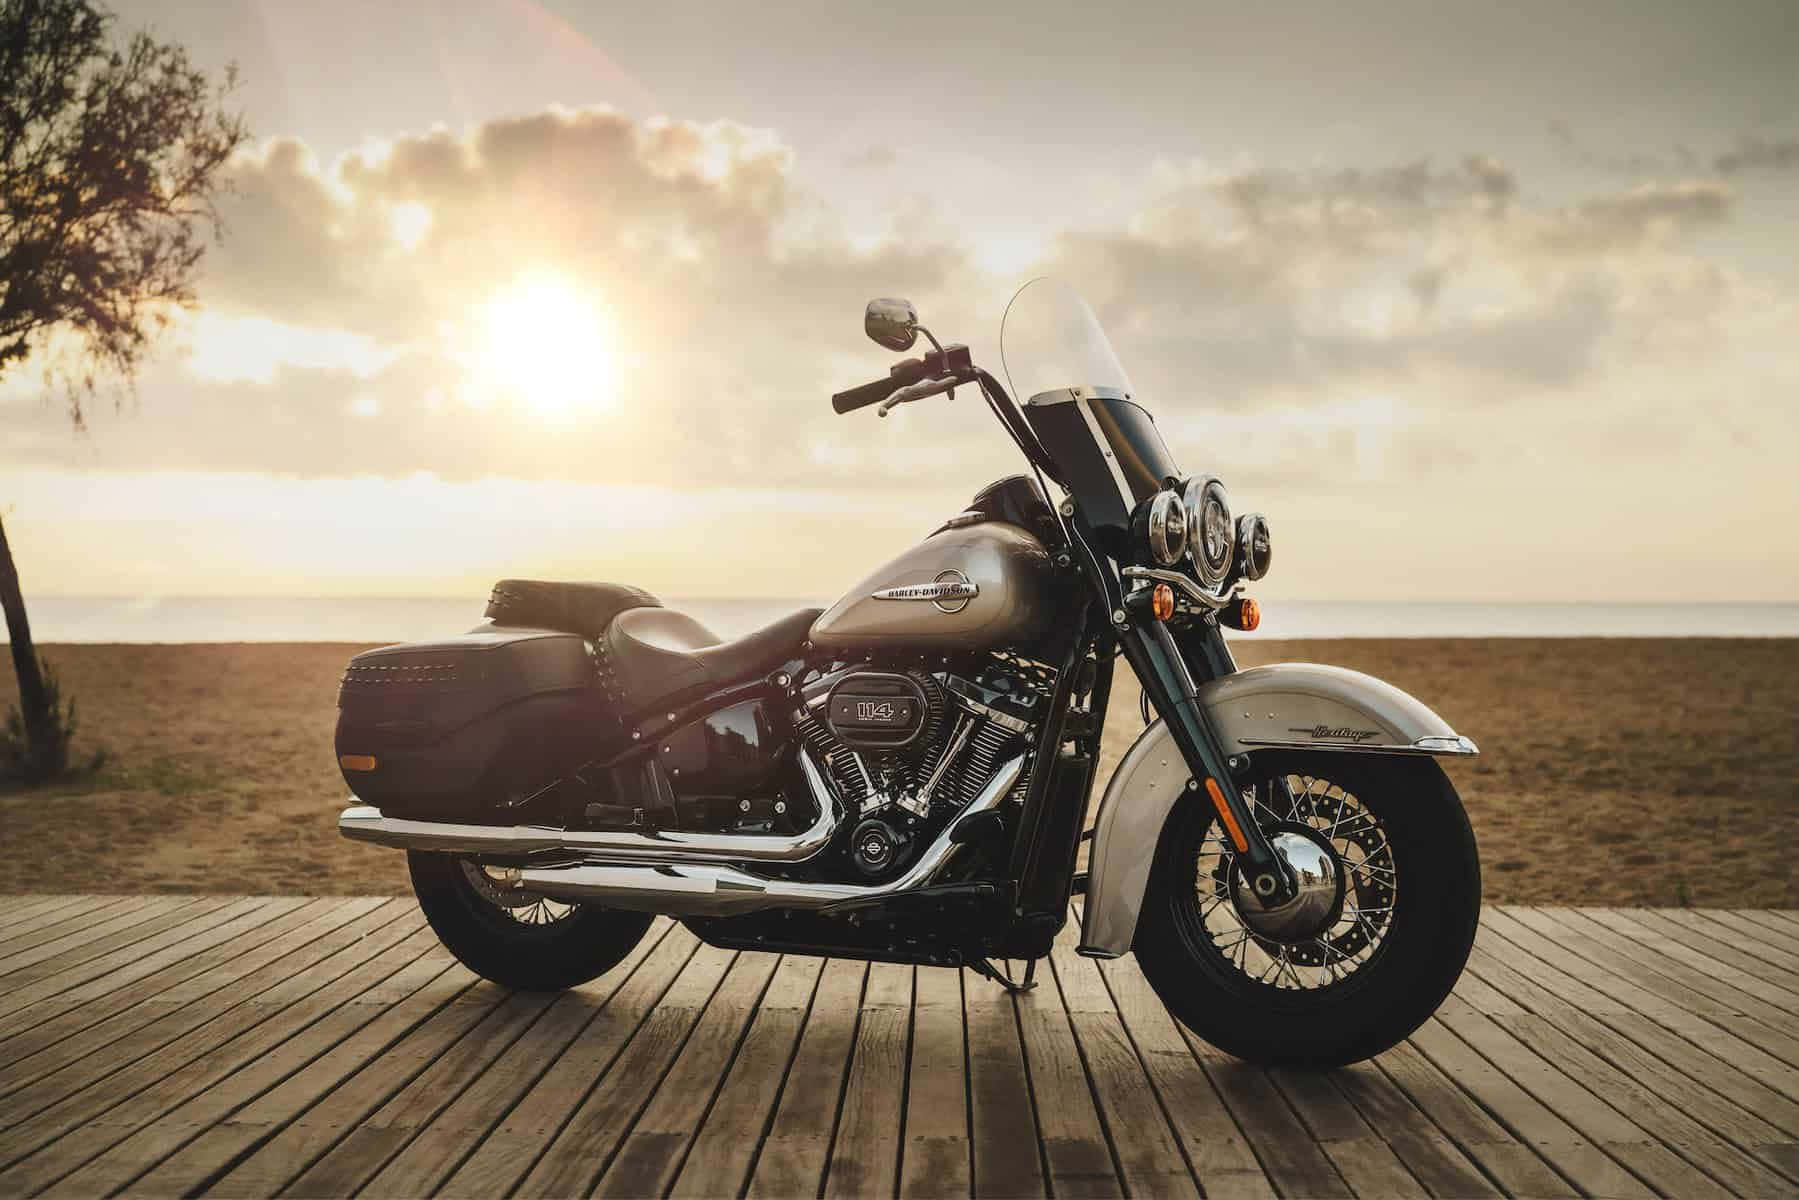 Experience the Freedom of the Road with Harley Davidson